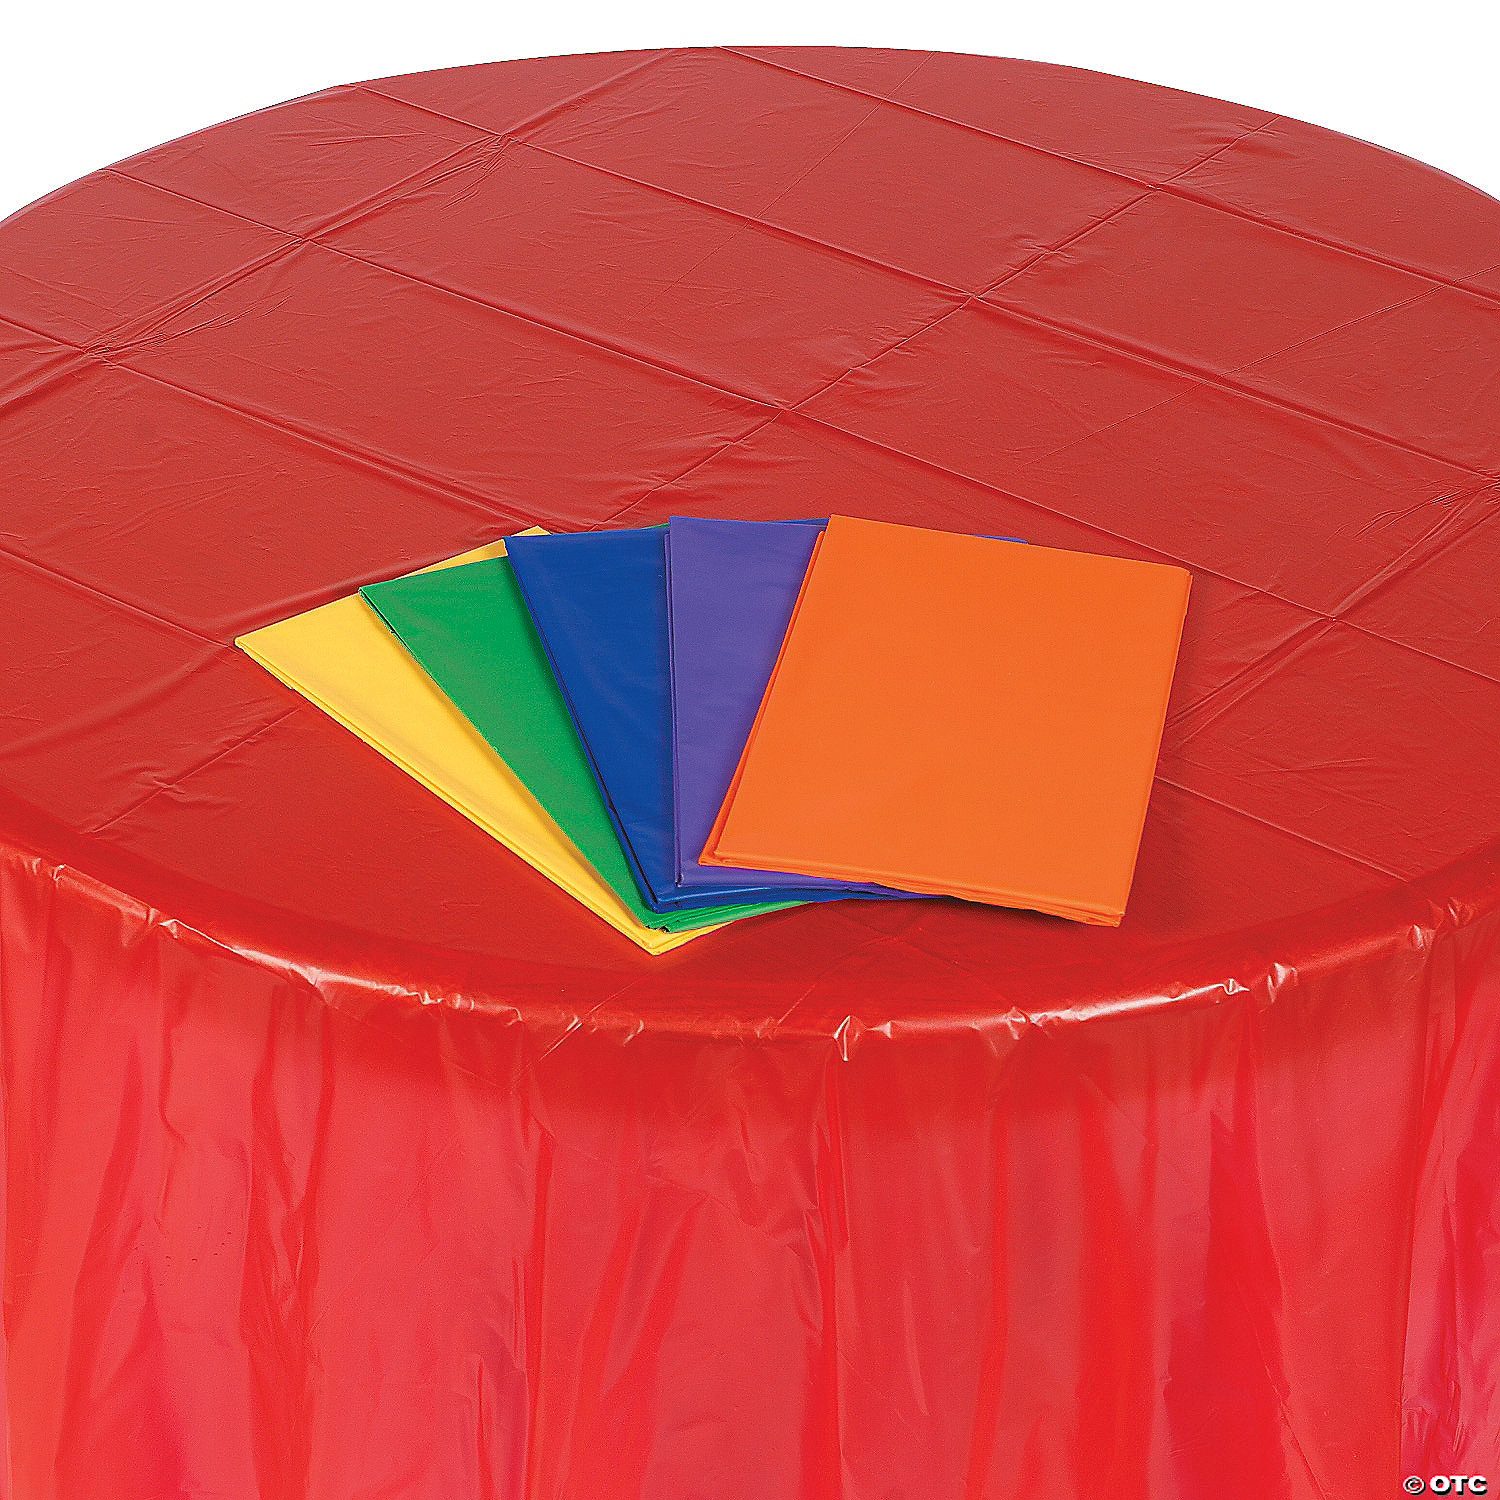 Colorful Round Plastic Tablecloth, Red Round Tablecloth Plastic